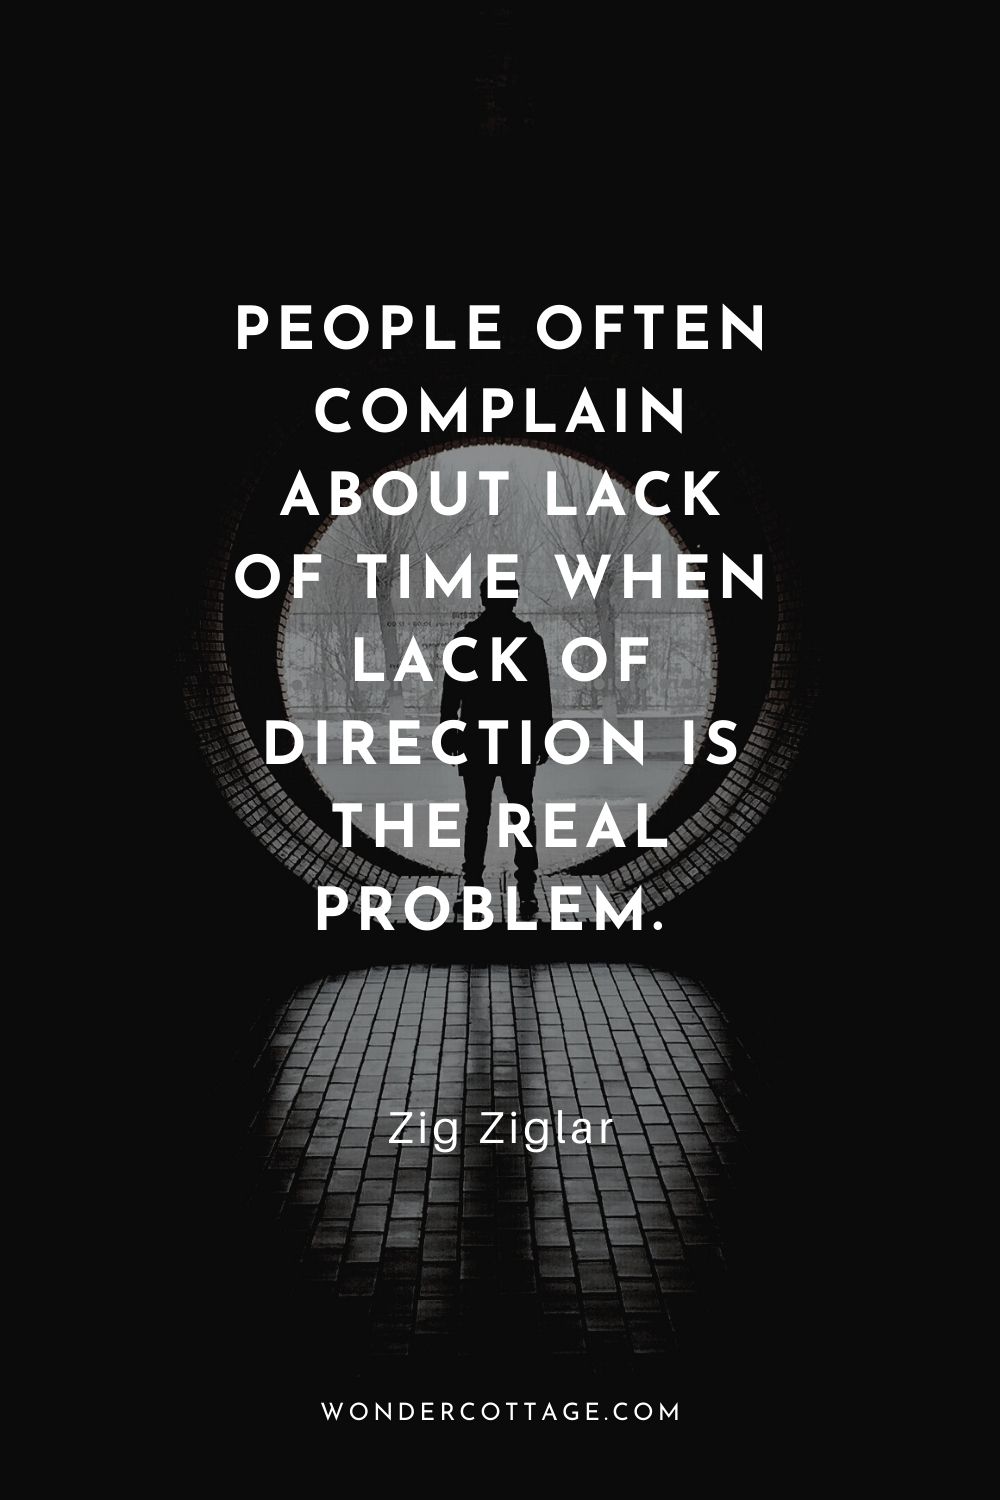 People often complain about lack of time when lack of direction is the real problem.  Zig Ziglar